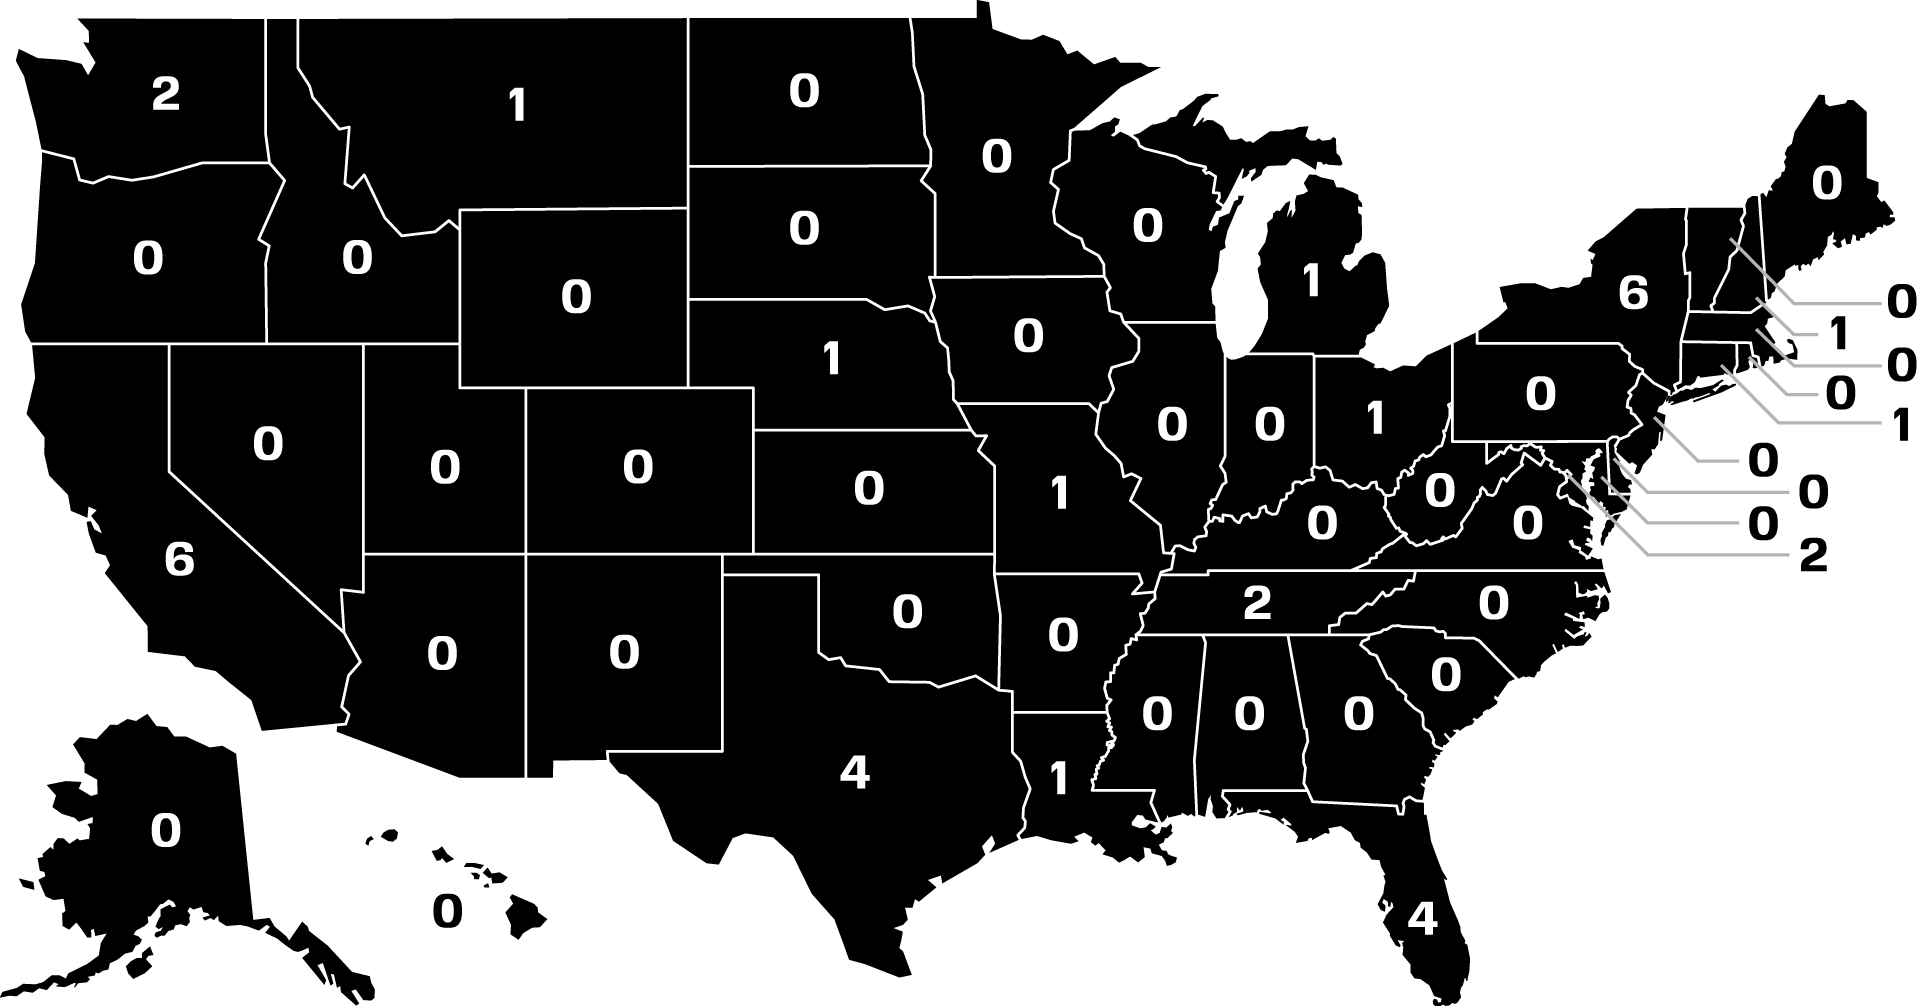 a map of the United States with the number of Anti-Muslim groups in each state